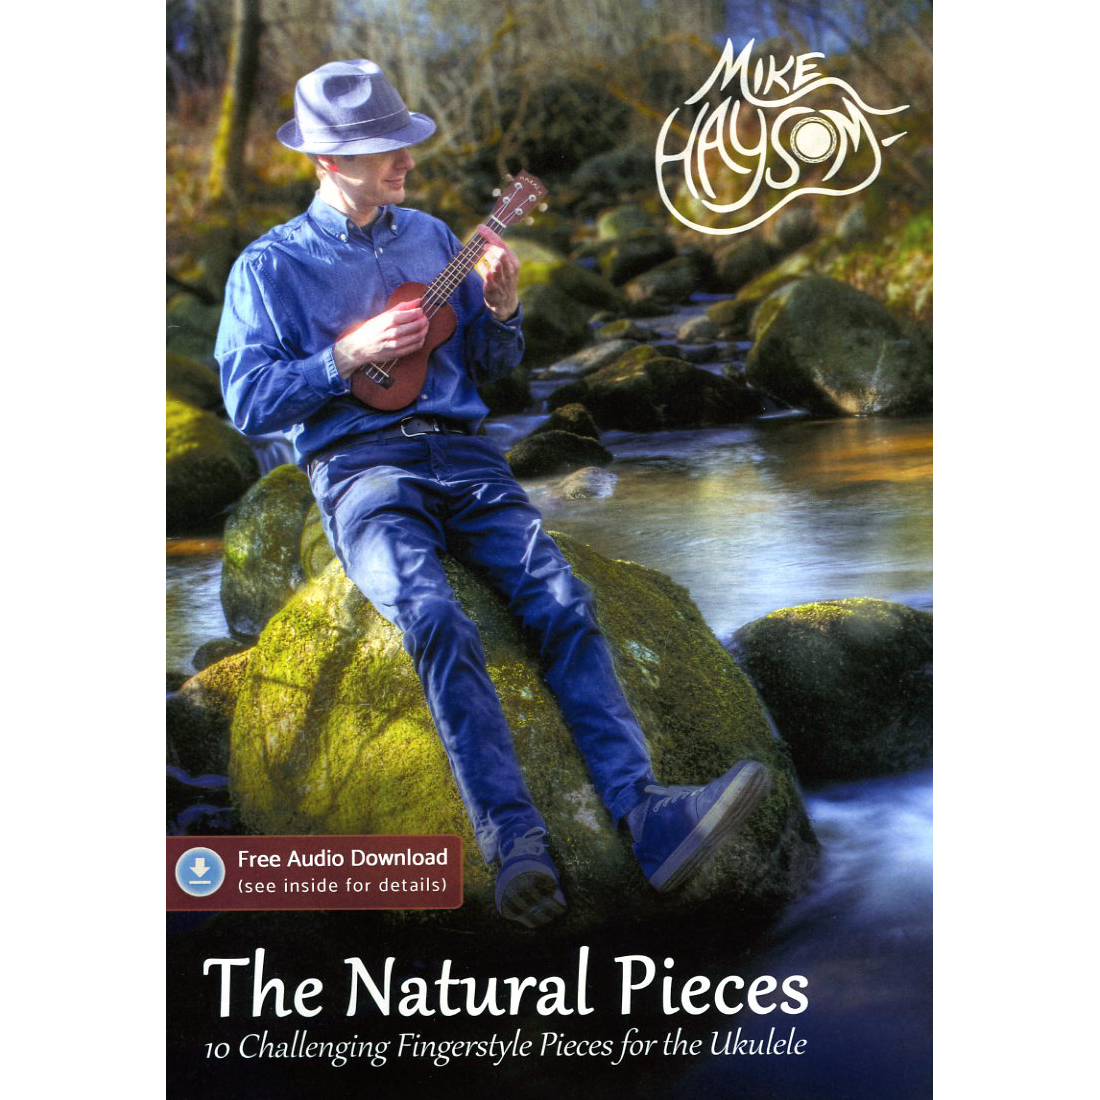 The Natural Pieces Book (Ukulele Tablature) + Free Audio Download! - Mike Haysom